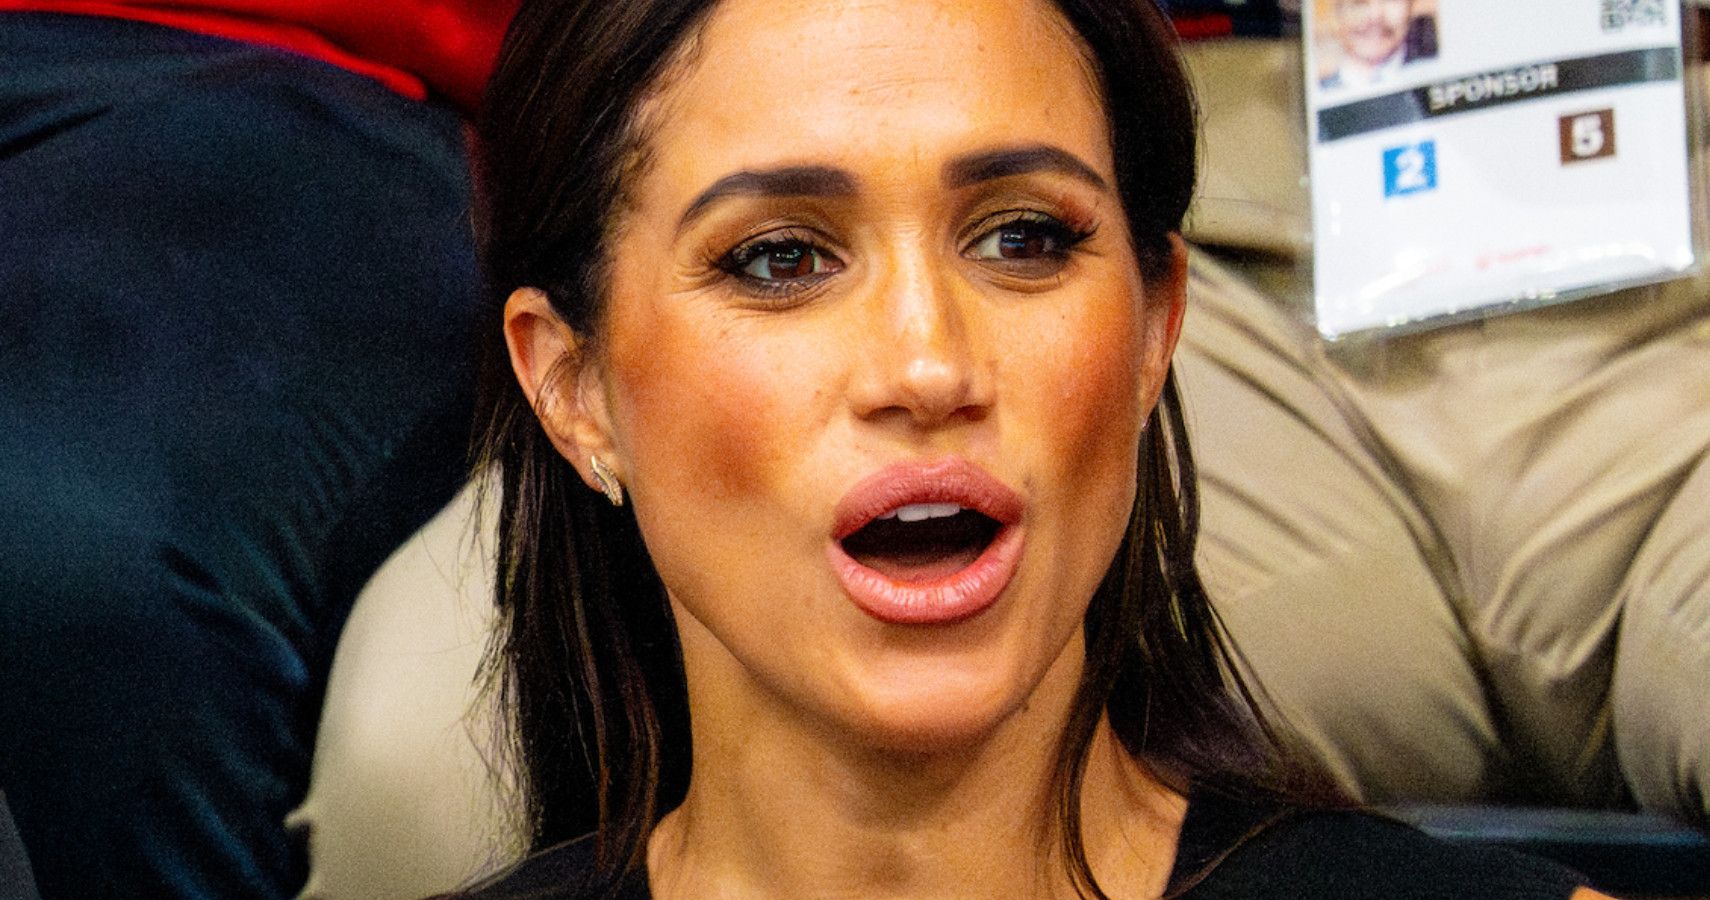 Meghan Markle Spotted Without Wedding Ring, Refuses To Address Divorce Rumors